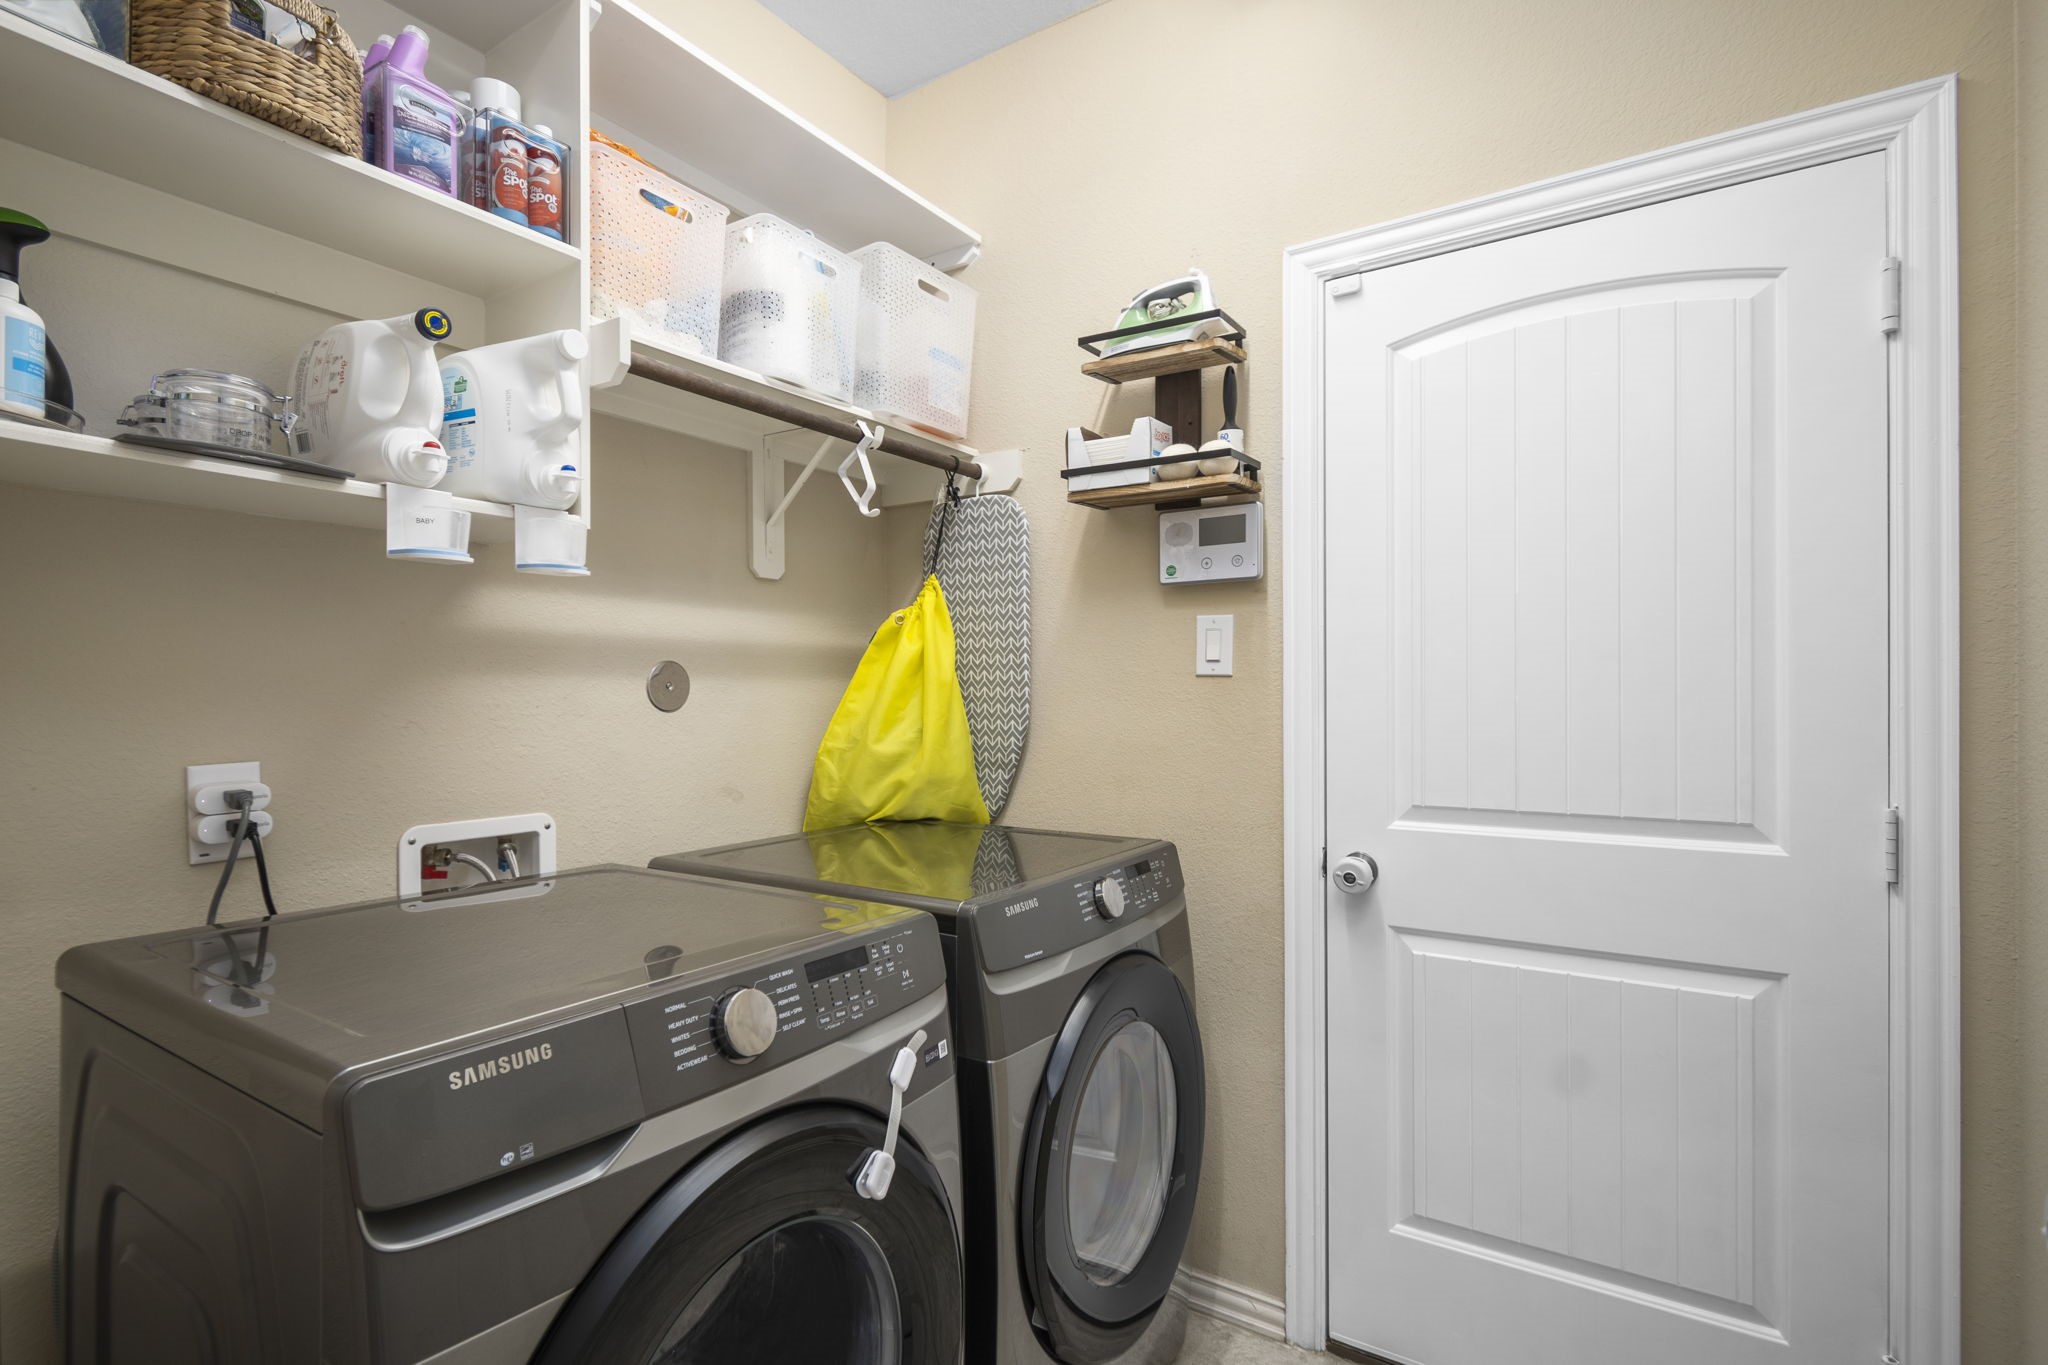 Utility/Laundry Room with Garage Door in Background - If you have additional questions regarding 7423 Simpson Springs Lane  in Spring or would like to tour the property with us call 800-660-1022 and reference MLS# 15164487.